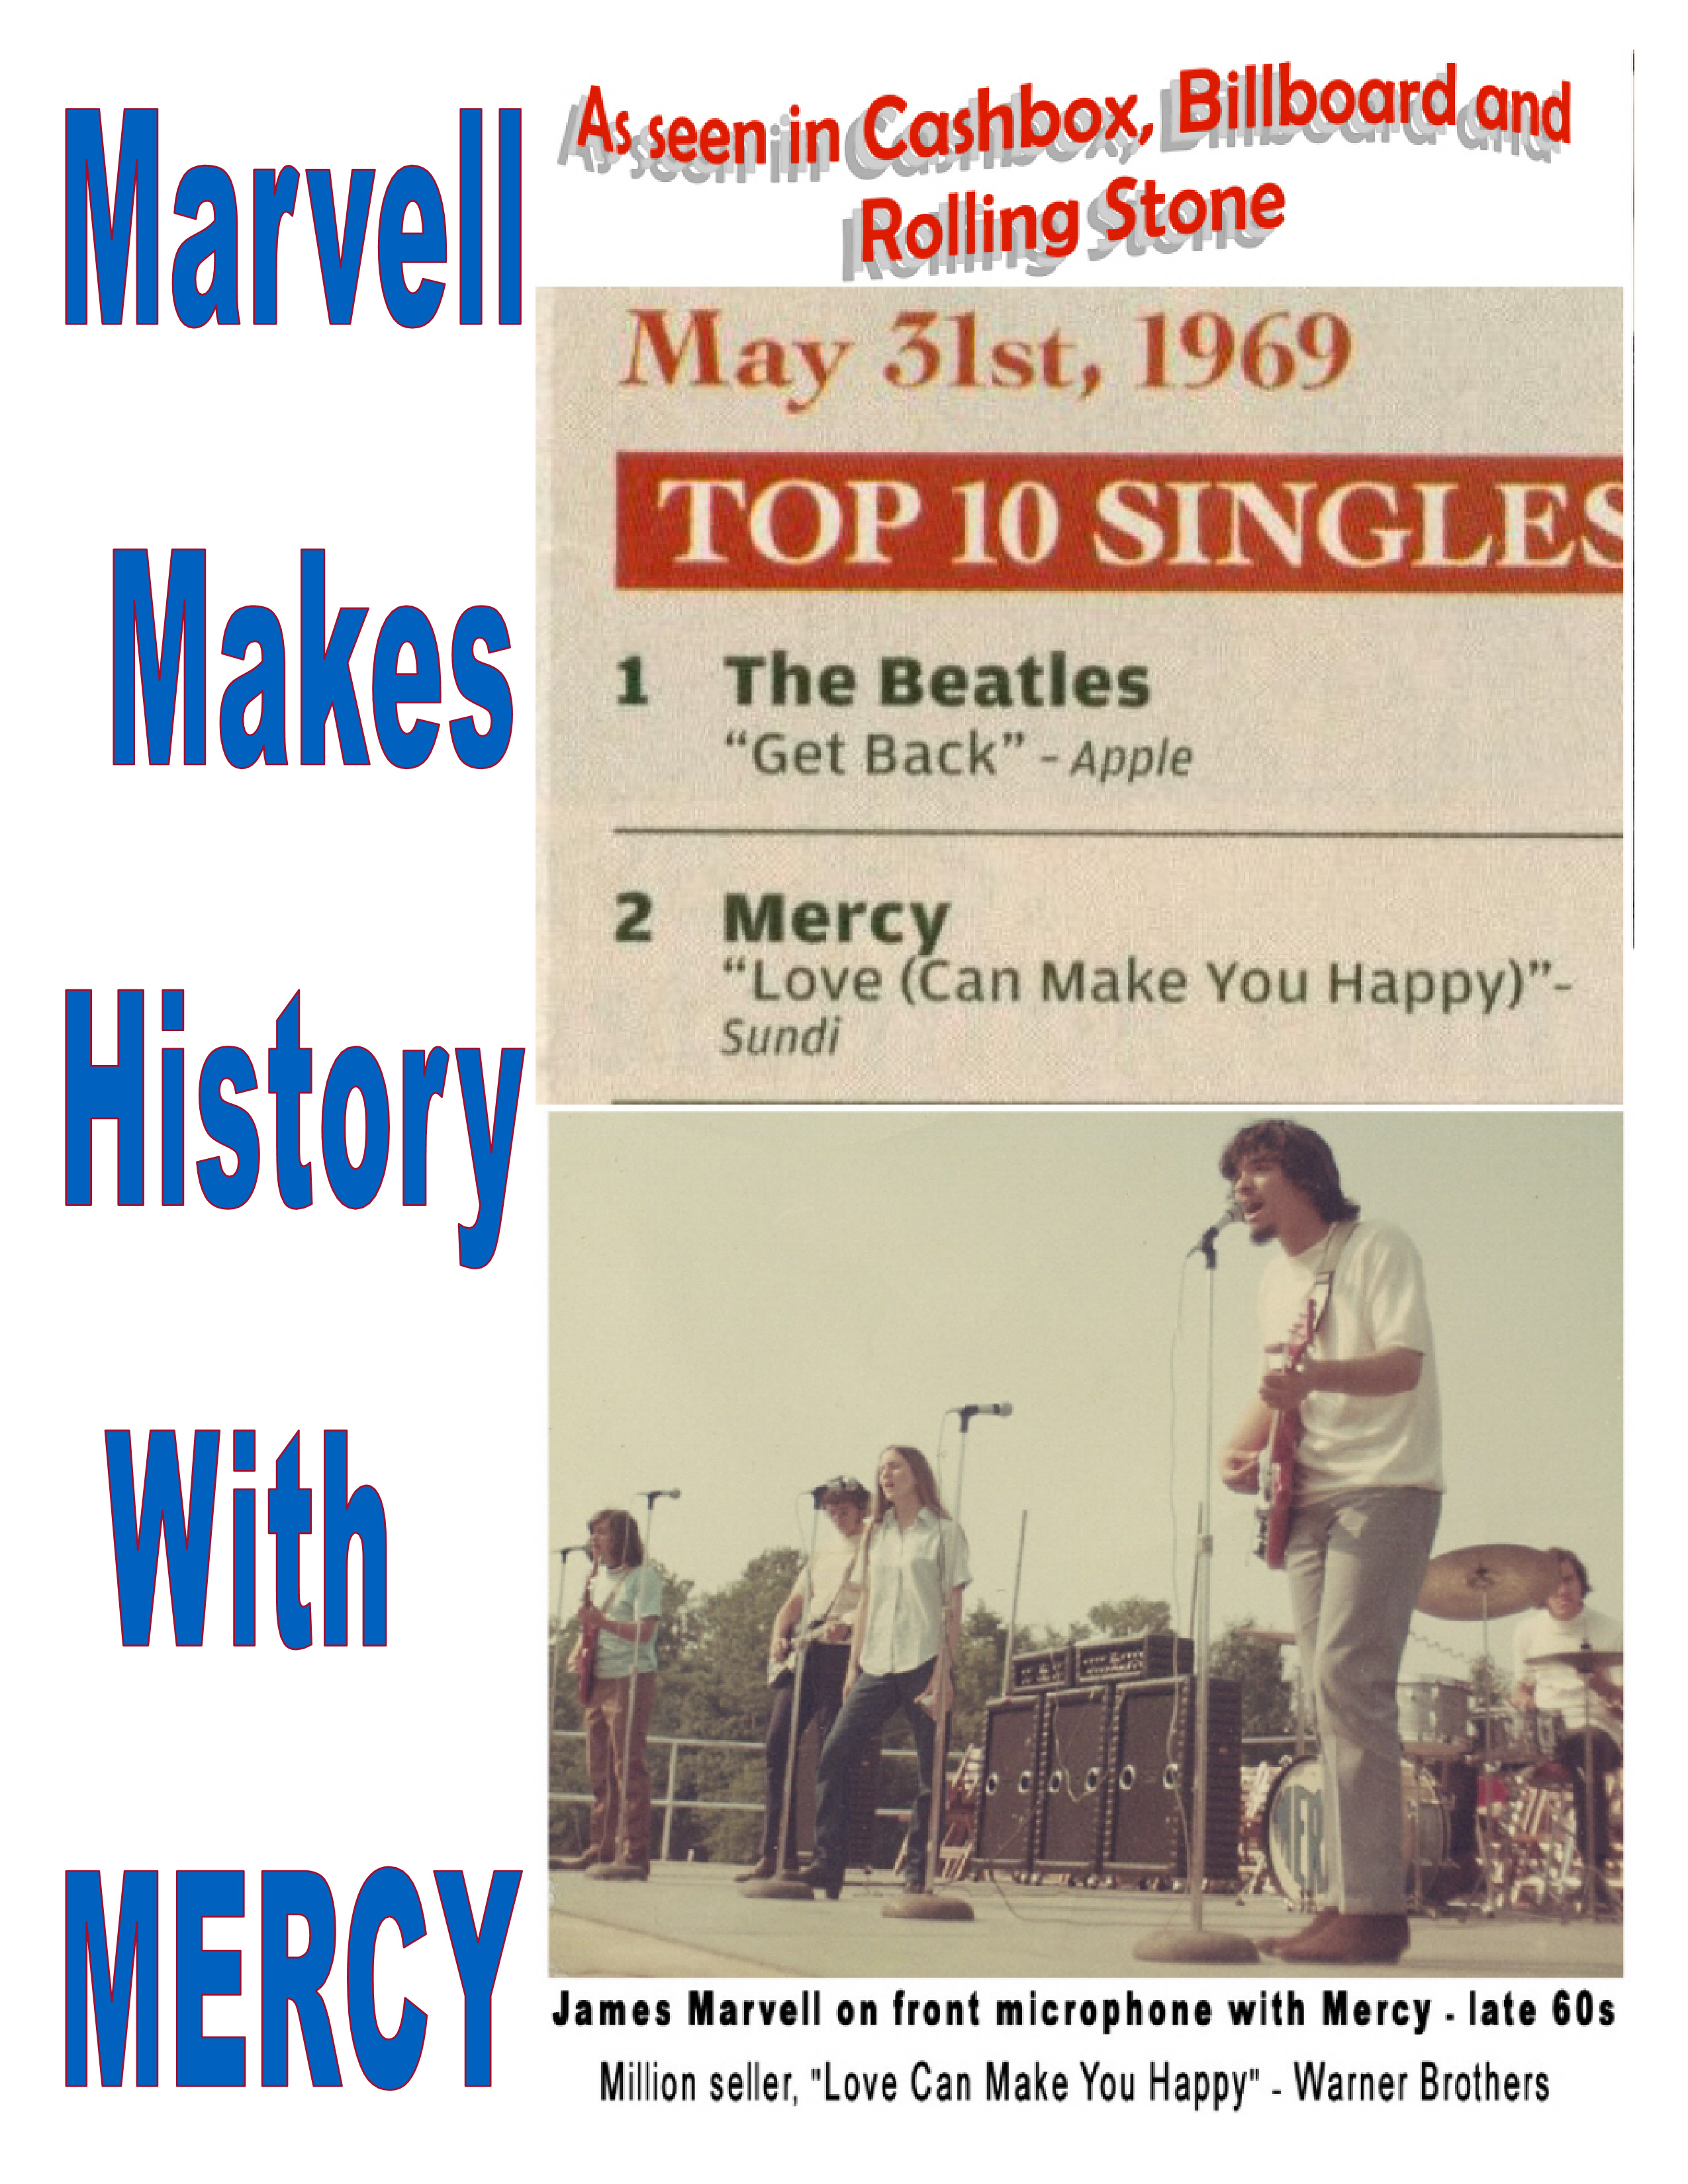 James Marvel - of Band Mercy